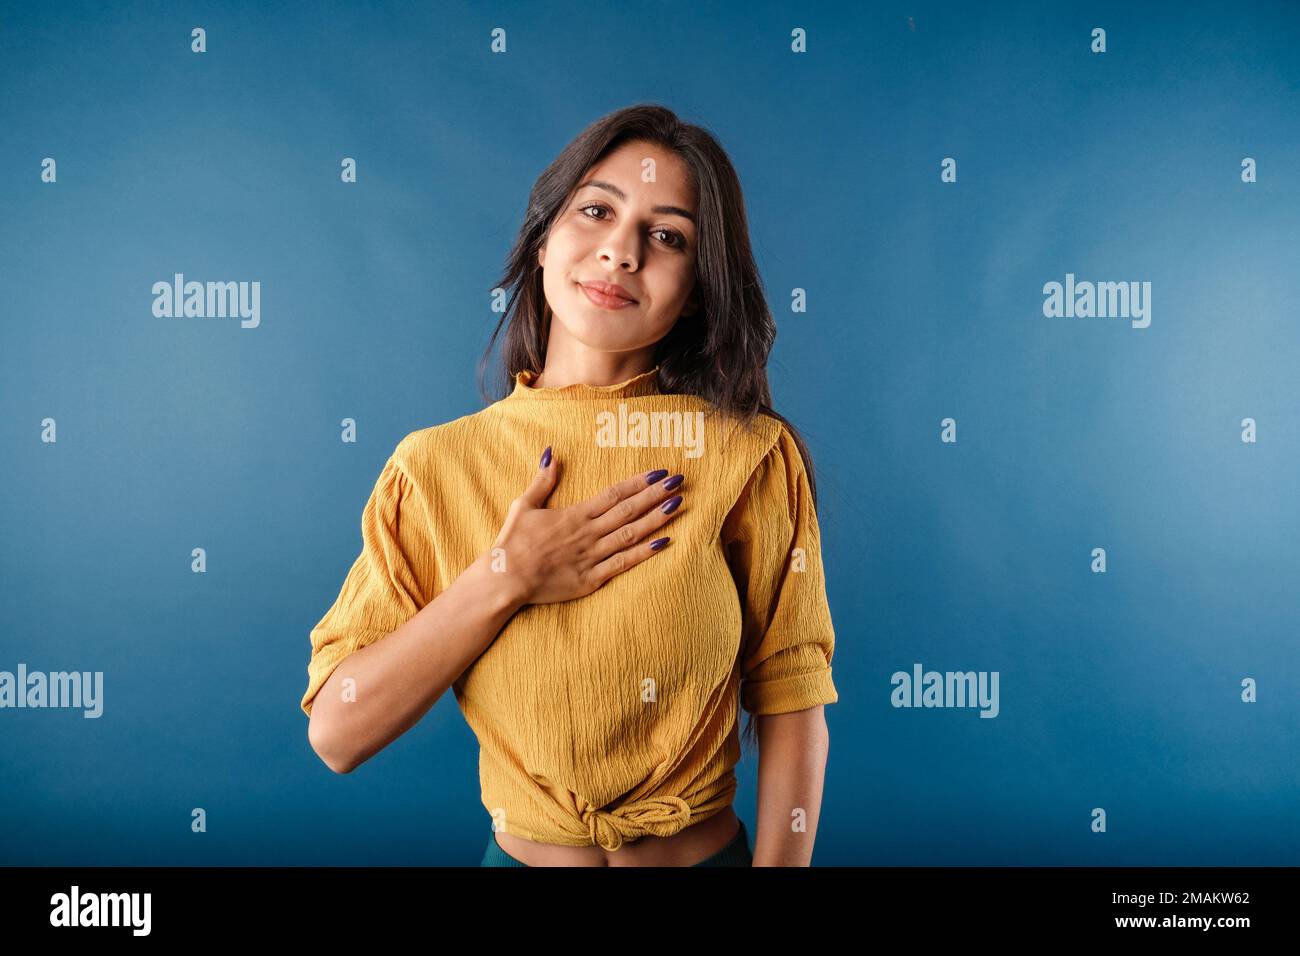 Portrait of young brown-haired woman wearing yellow top isolated over blue background touching chest with her palm, smiles tenderly and looks at the c Stock Photo